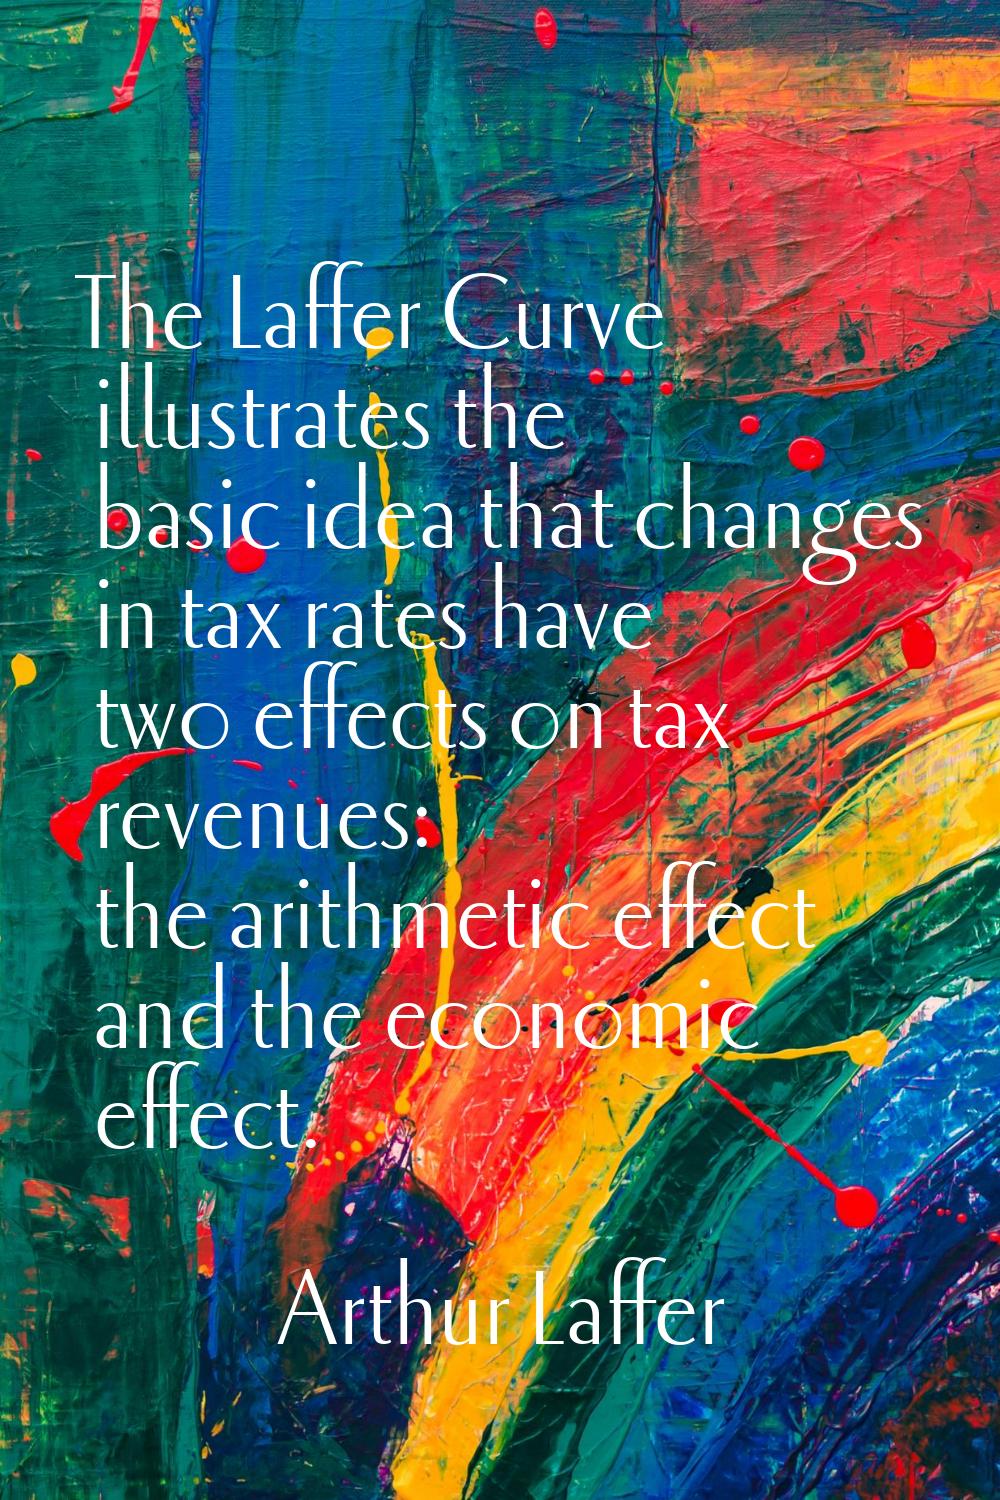 The Laffer Curve illustrates the basic idea that changes in tax rates have two effects on tax reven